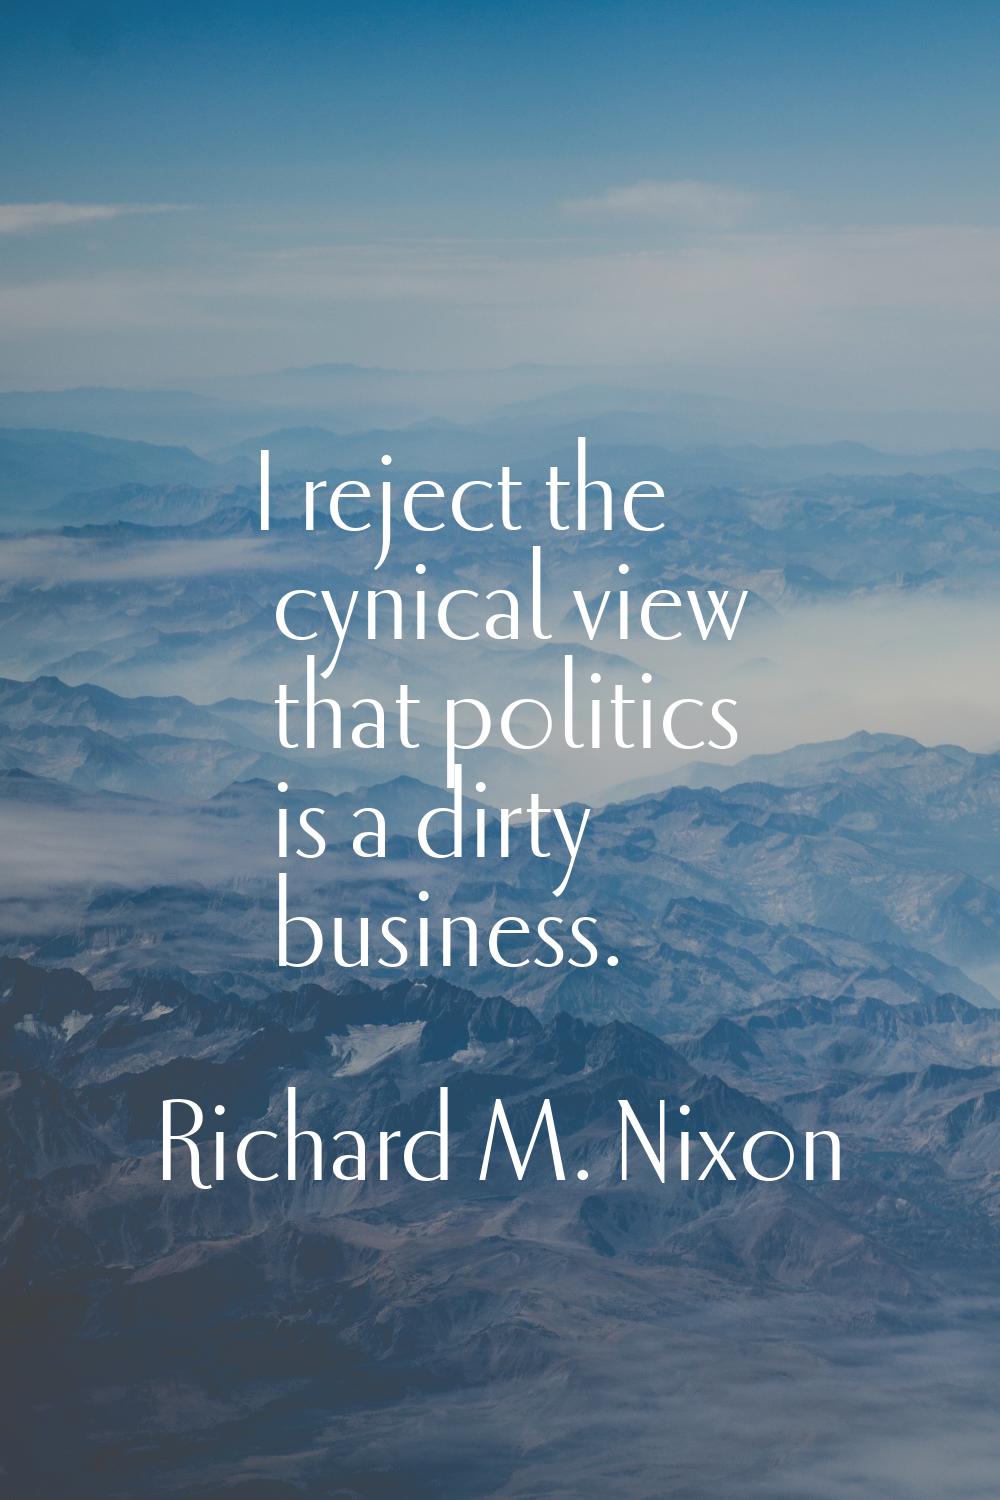 I reject the cynical view that politics is a dirty business.